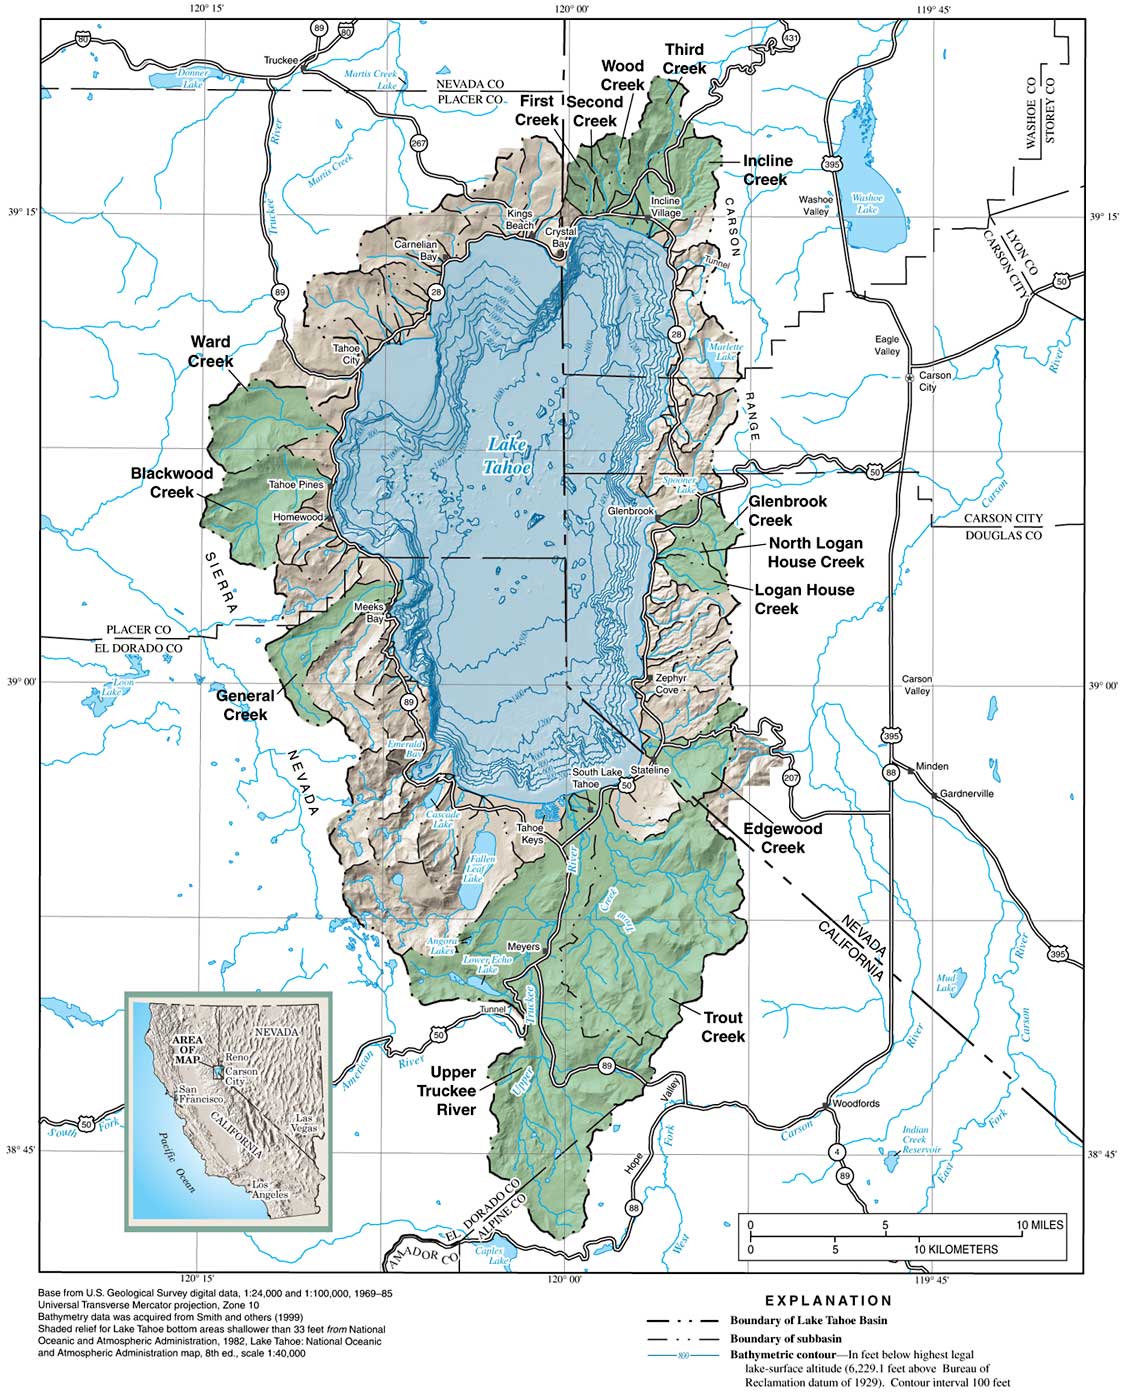 Map showing Lake Tahoe Basin and selected monitored watersheds.